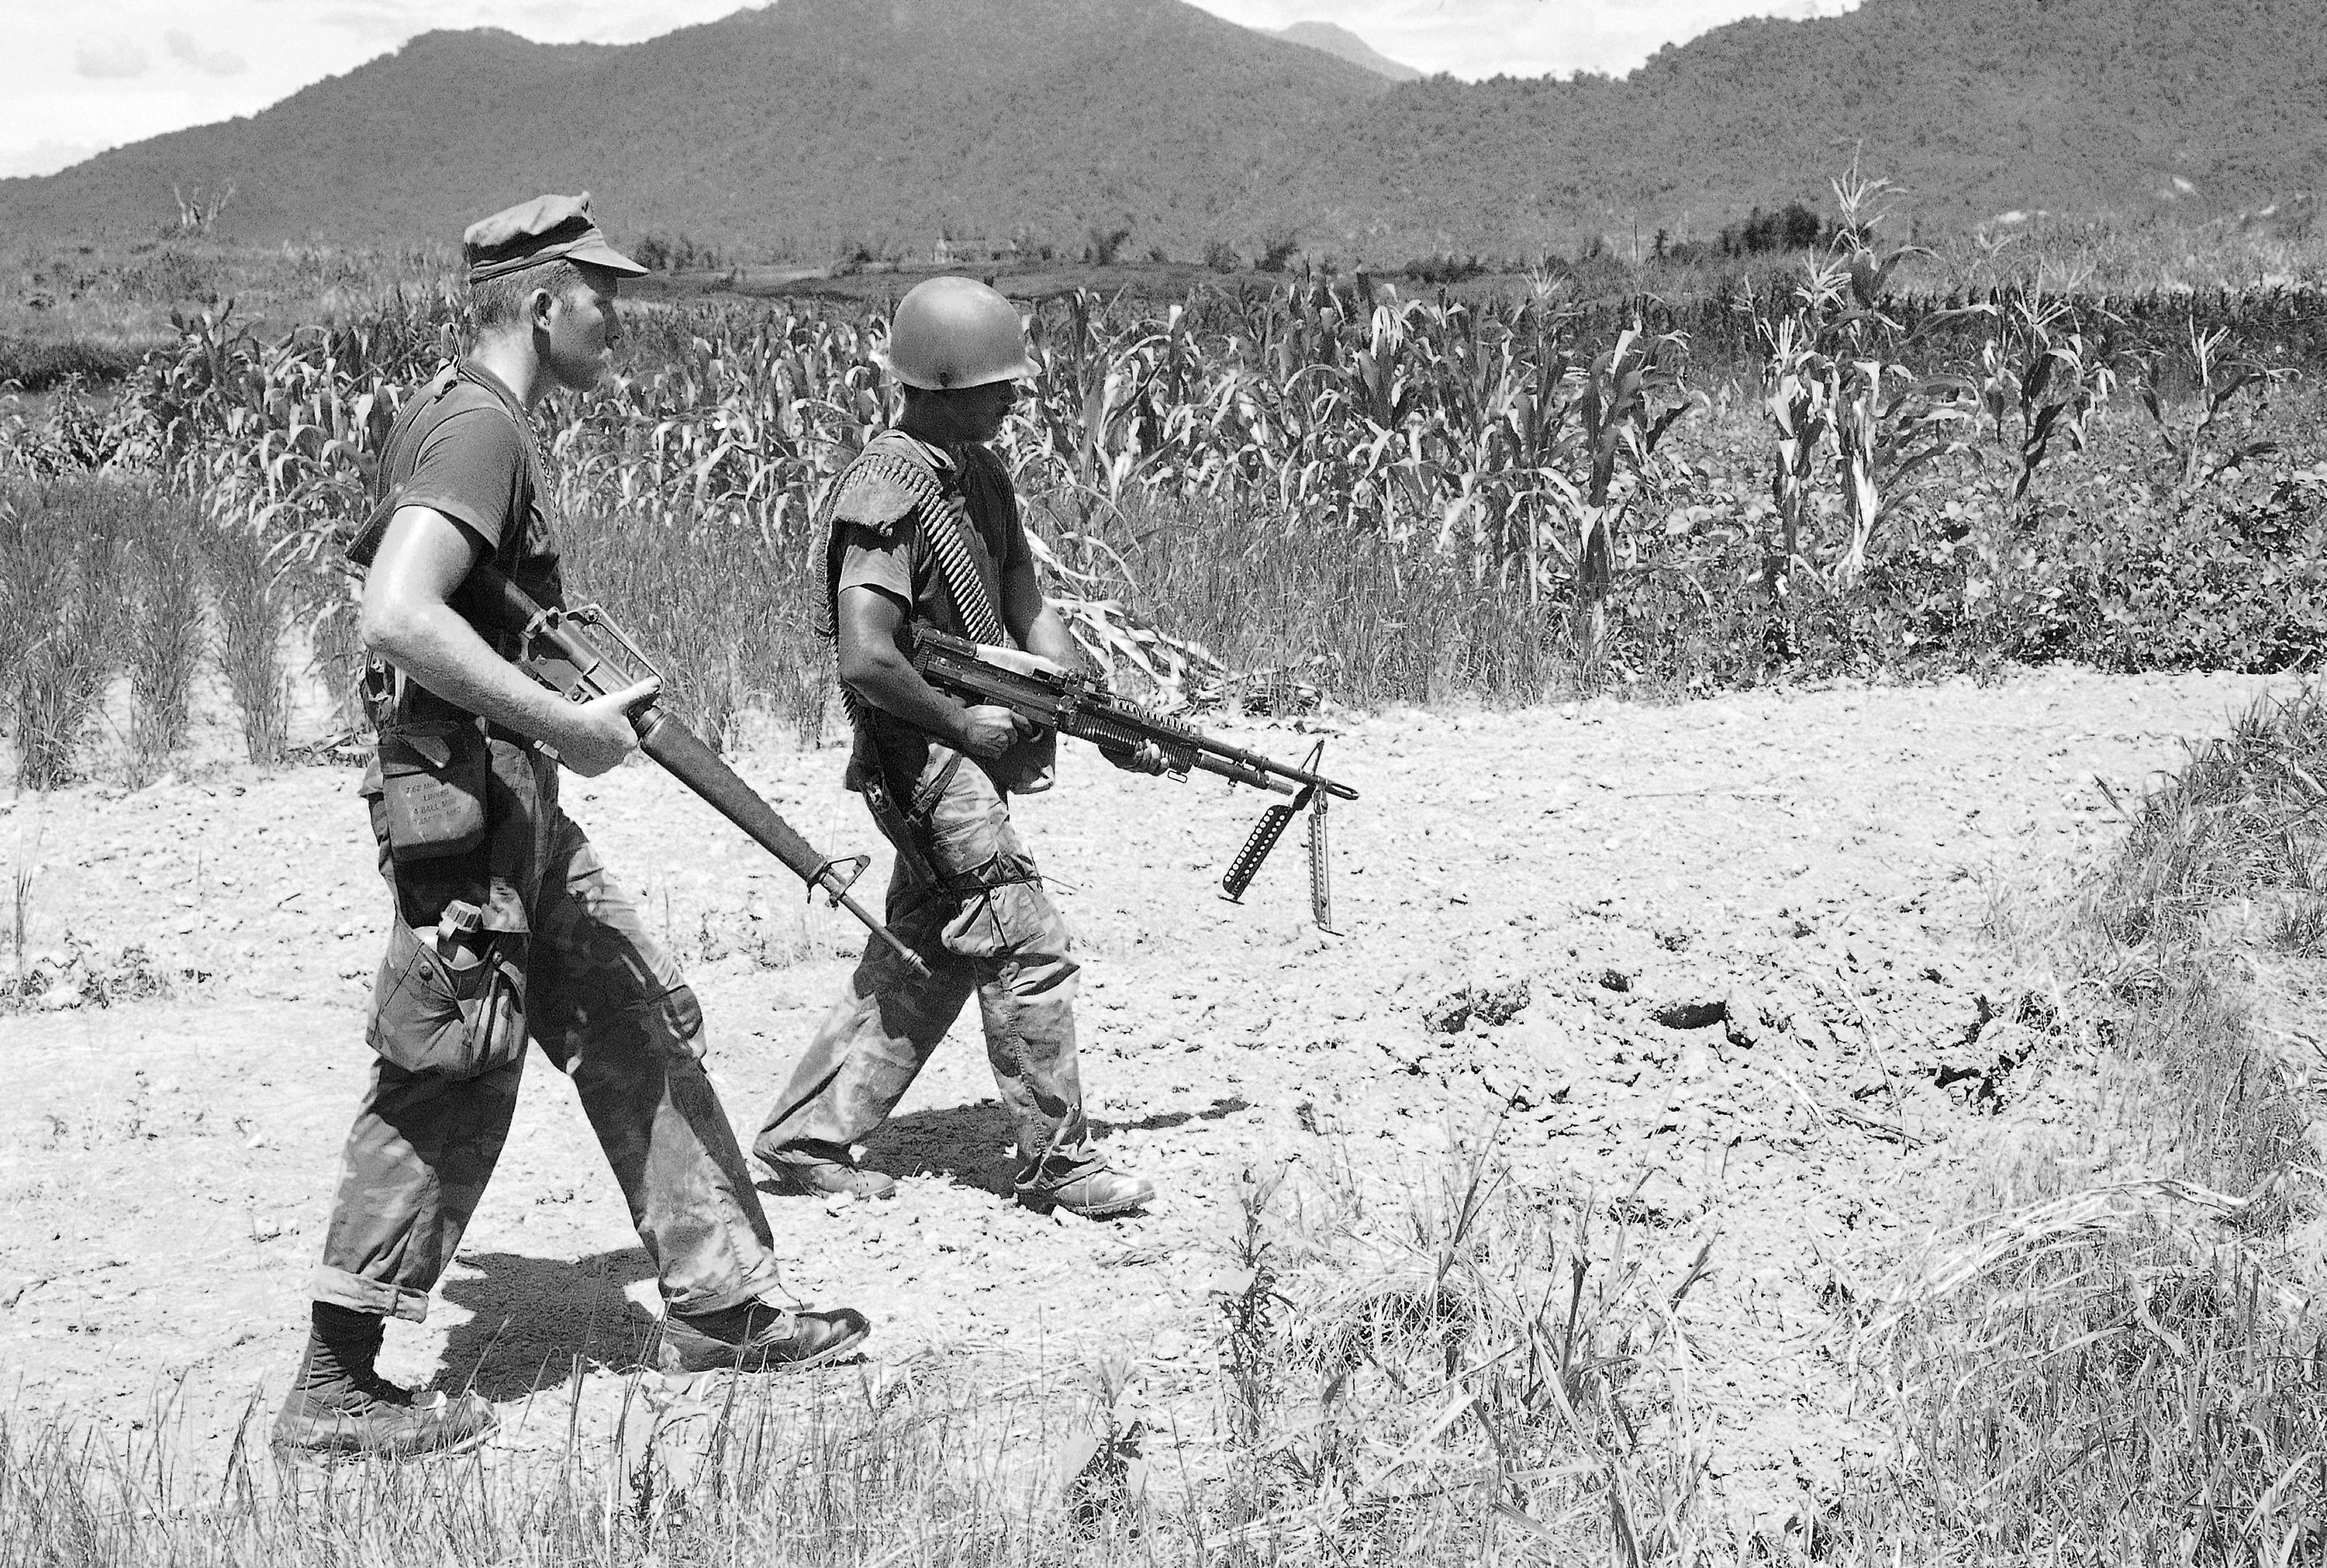 Troops Exposed To Agent Orange Outside Of Vietnam Could Be In Line For Presumptive Benefits